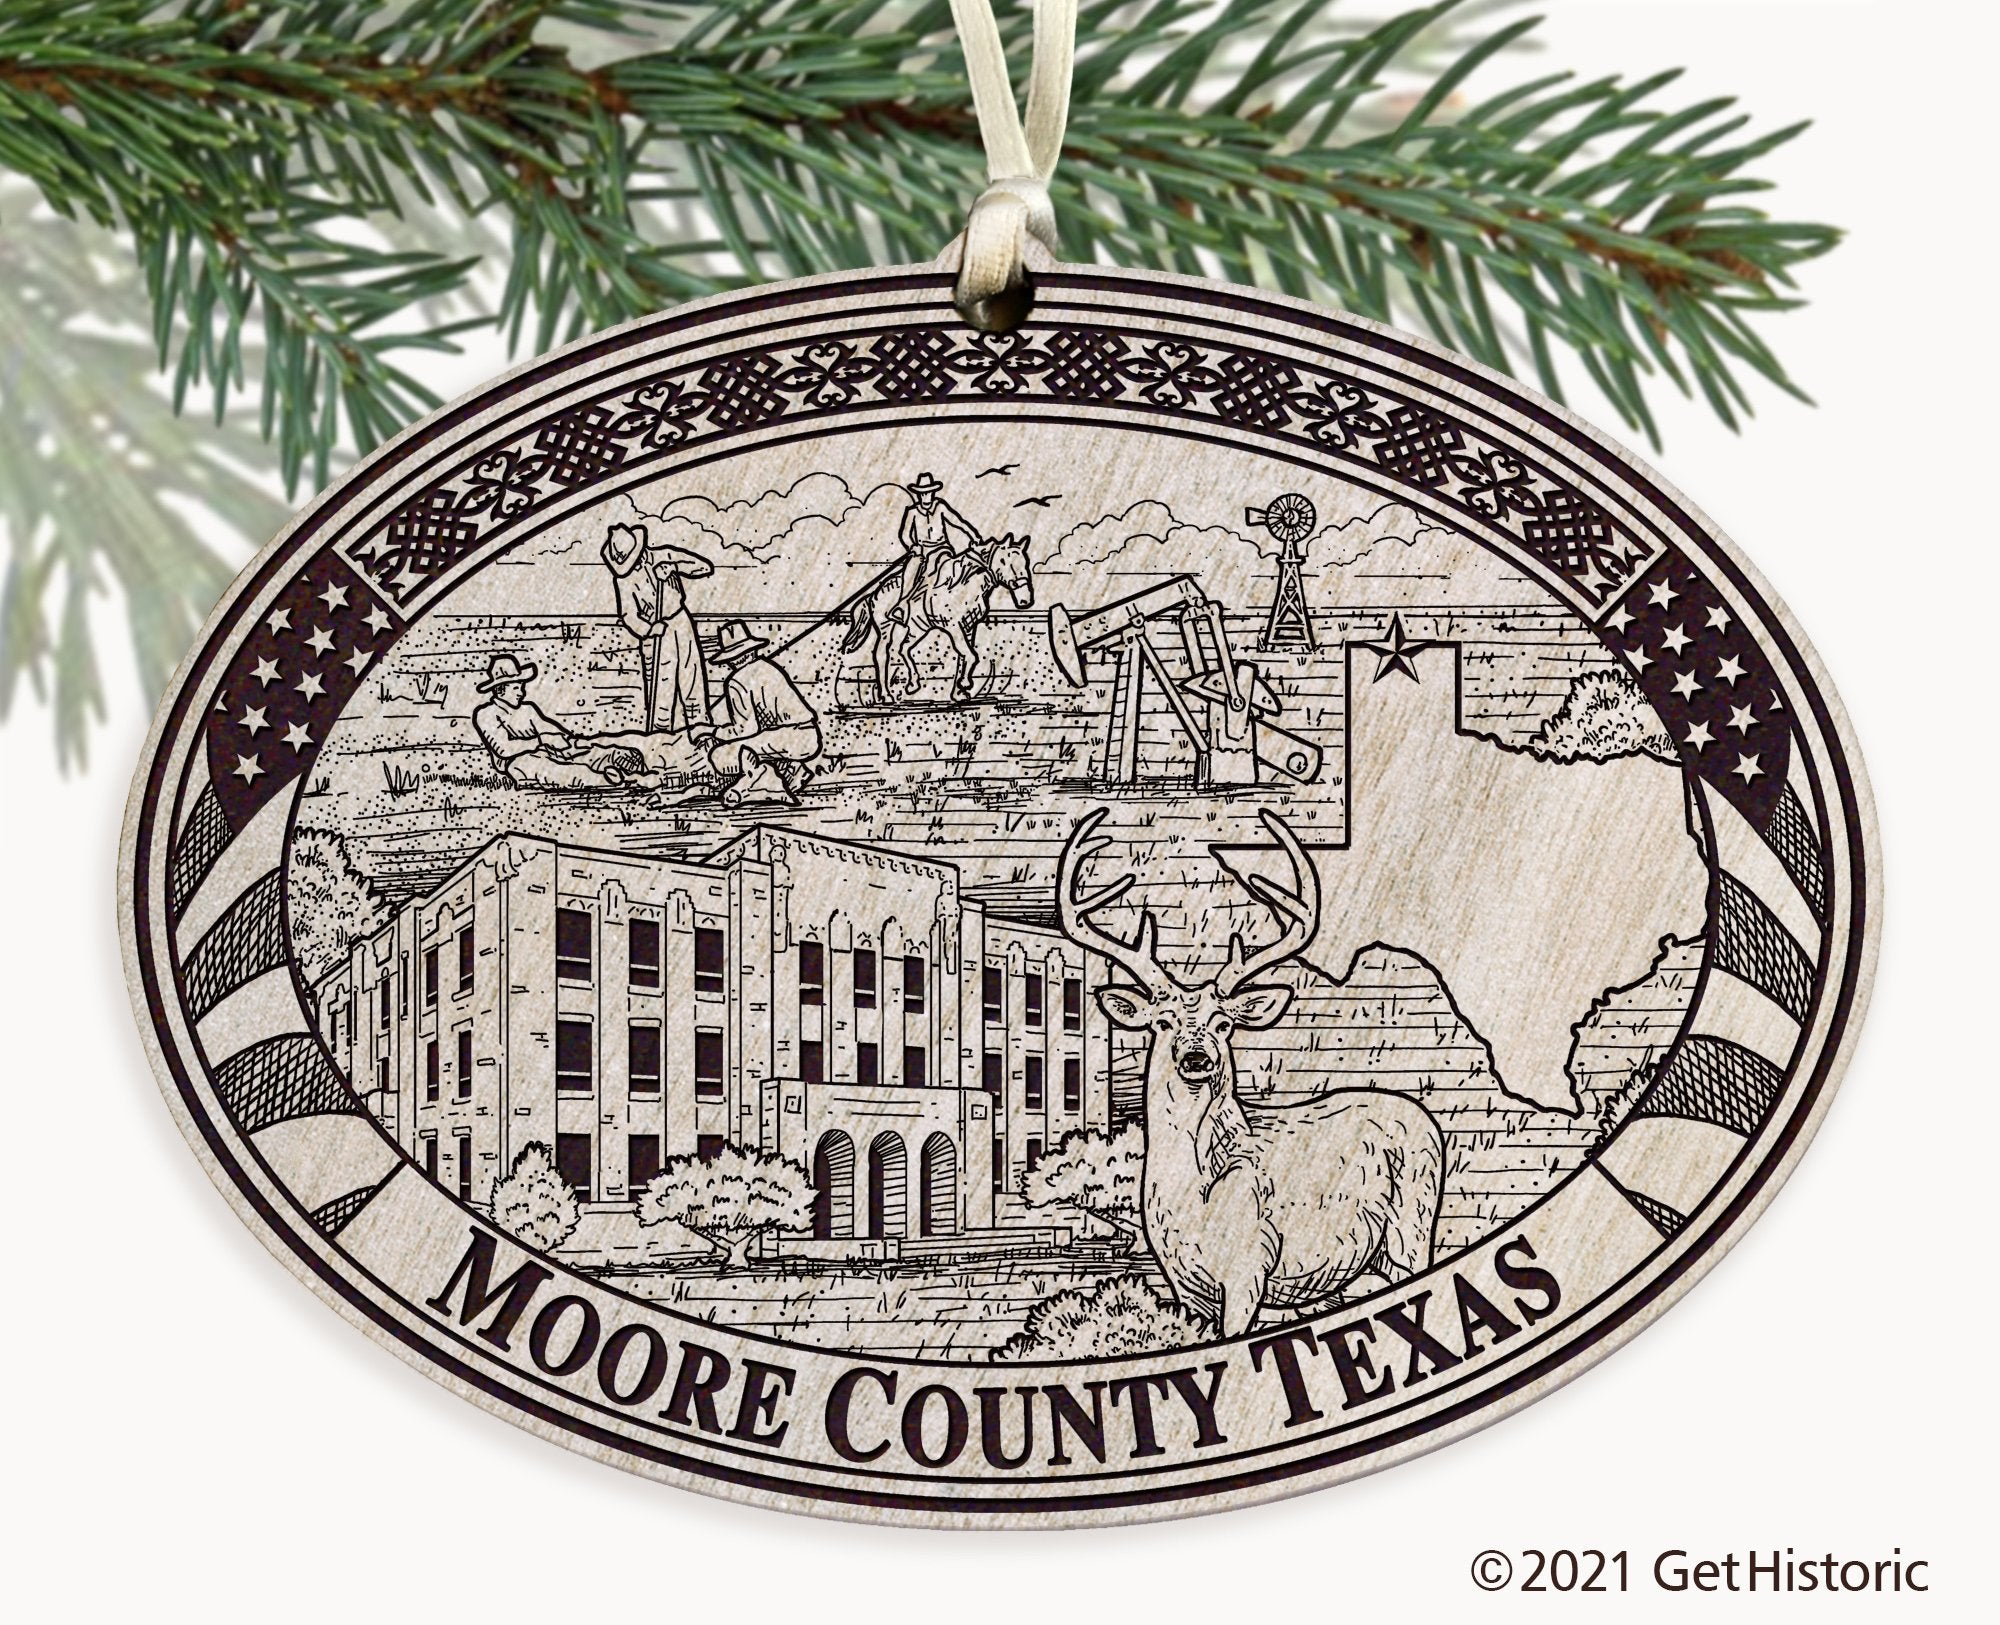 Moore County Texas Engraved Ornament